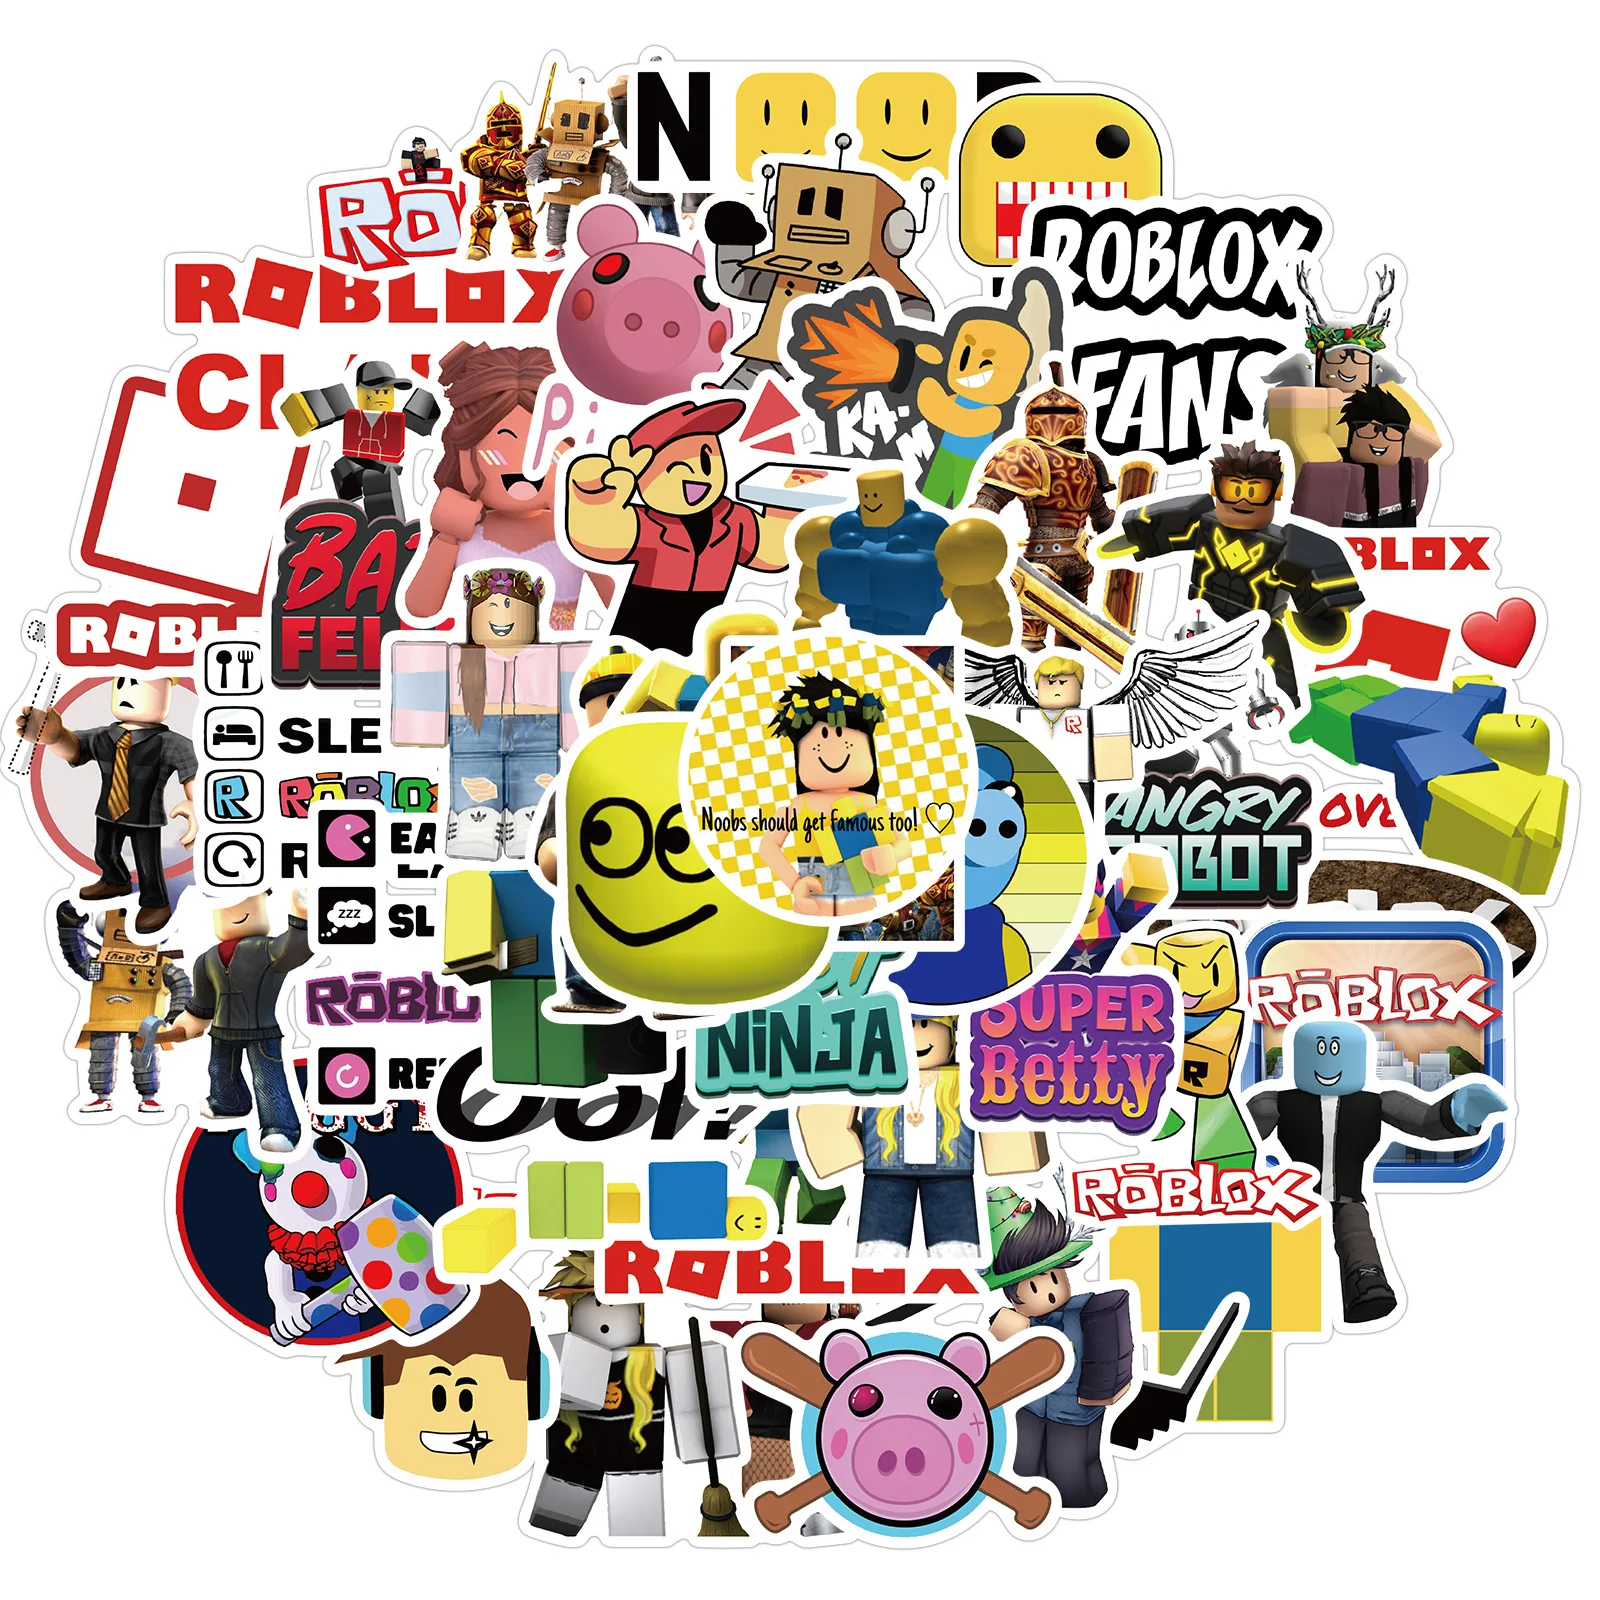 50pcs New Game Roblox Stickers Set For Hydroflasks Luggage Skateboard Laptop Car Mac Diy Graffiti Vinyl Waterproof Stickers Buy Vinyl Stickers Laptop Stickers Stickers For Adults Stickers For Water Bottles Car - how do you get off the skateboards on roblox